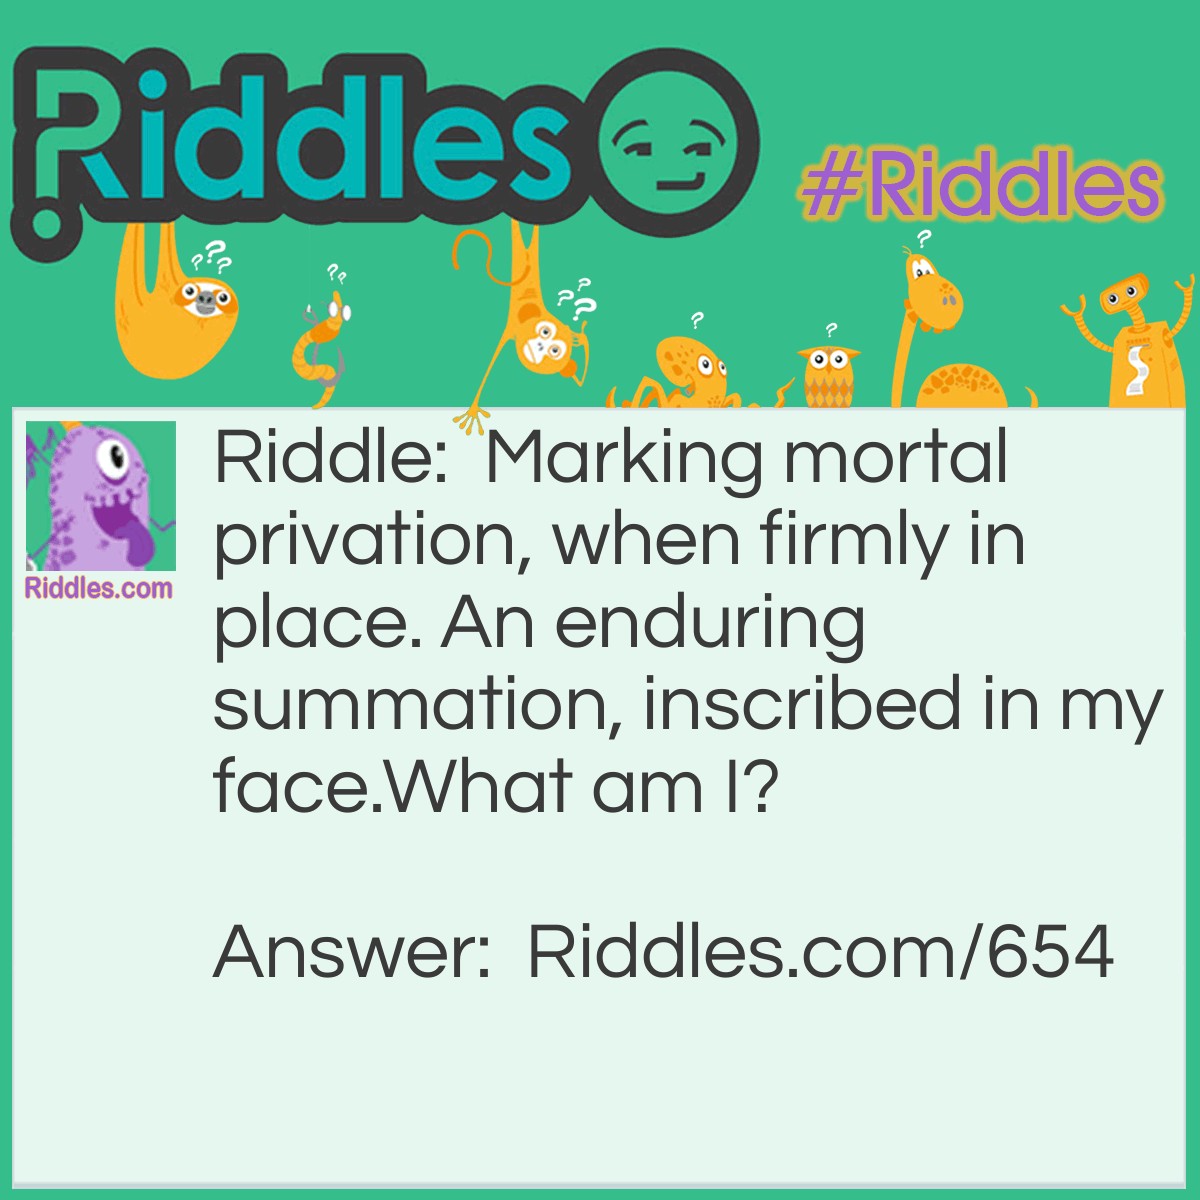 Riddle: Marking mortal privation, when firmly in place. An enduring summation, inscribed in my face.
What am I? Answer: A Tombstone.